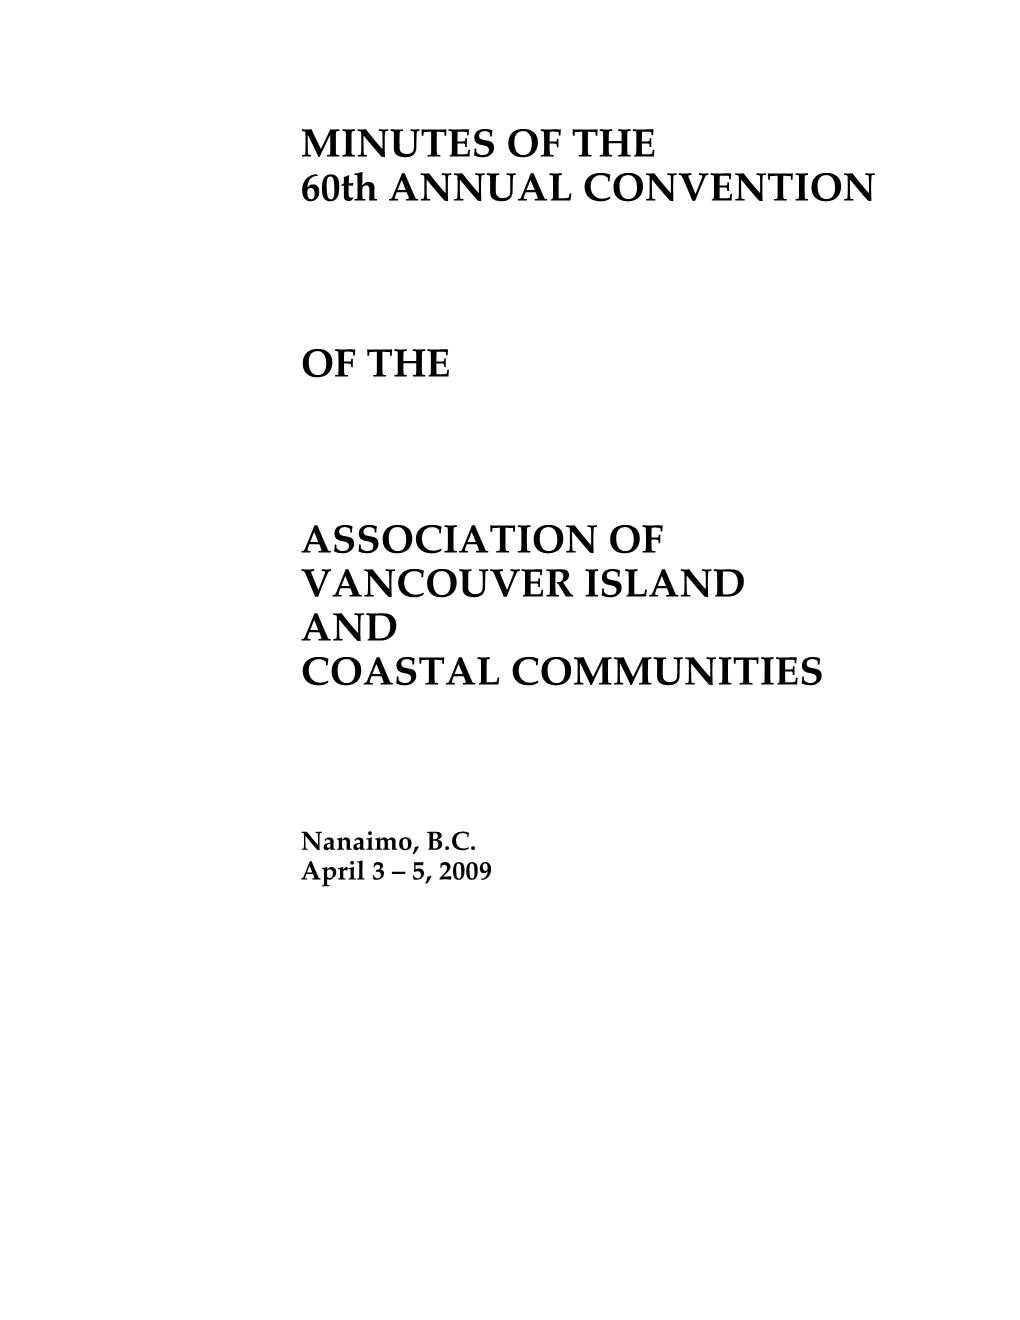 2009 AGM & Convention Minutes